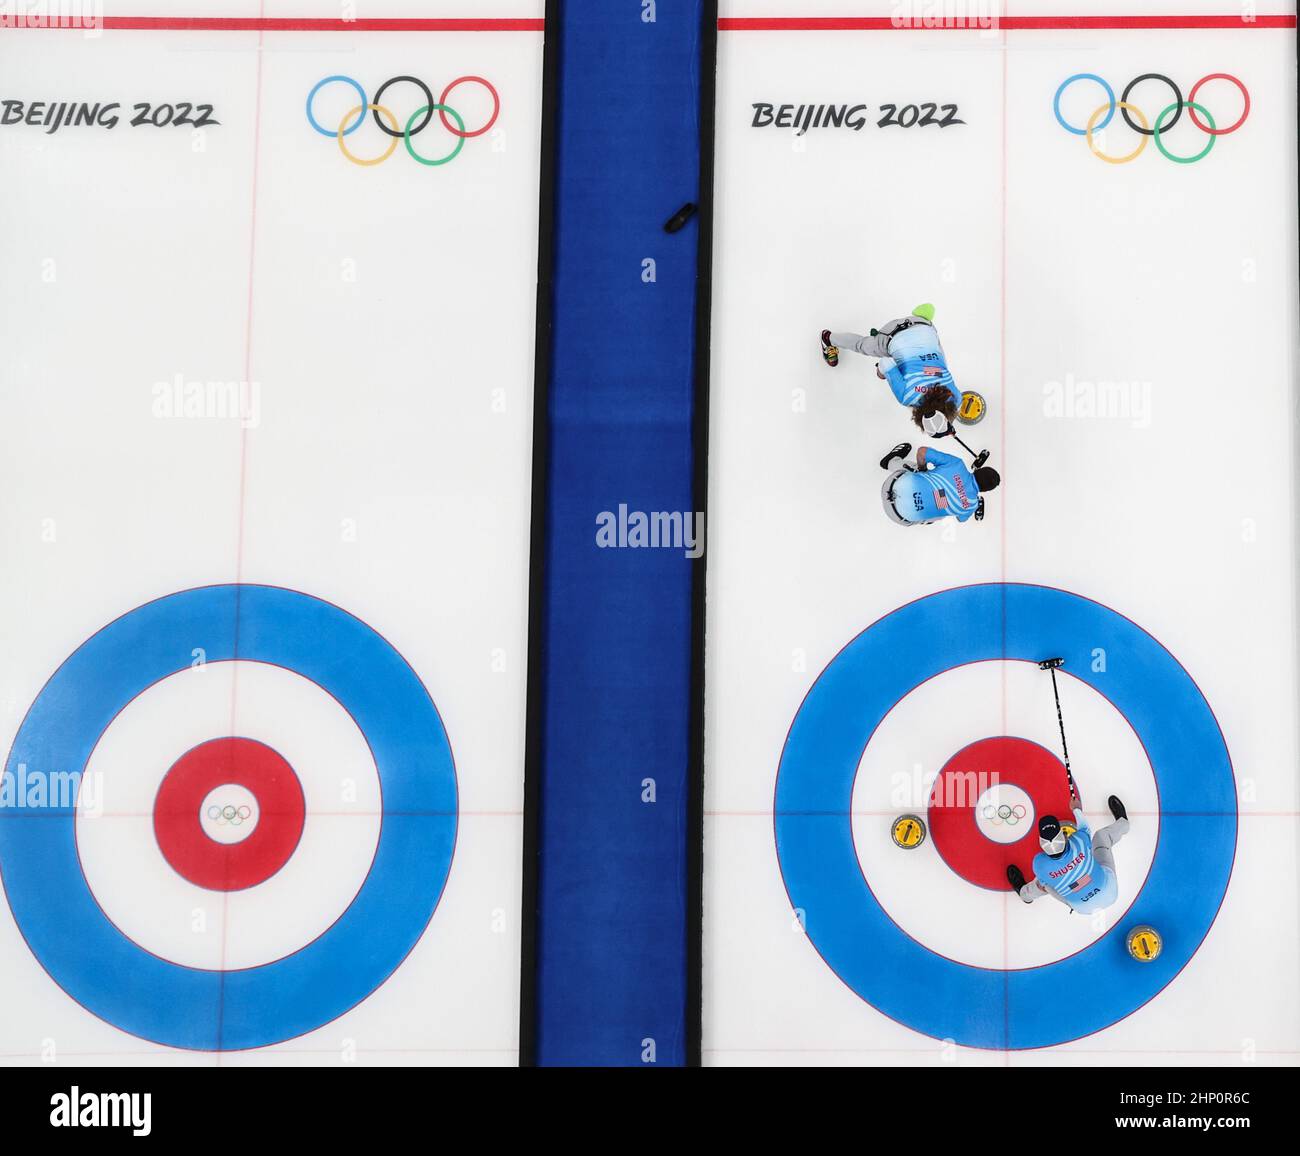 Beijing, China. 18th Feb, 2022. John Landsteiner (C) of the United States competes during the curling men's bronze medal game of Beijing 2022 Winter Olympics between Canada and the United States at National Aquatics Centre in Beijing, capital of China, Feb. 18, 2022. Credit: Yang Lei/Xinhua/Alamy Live News Stock Photo